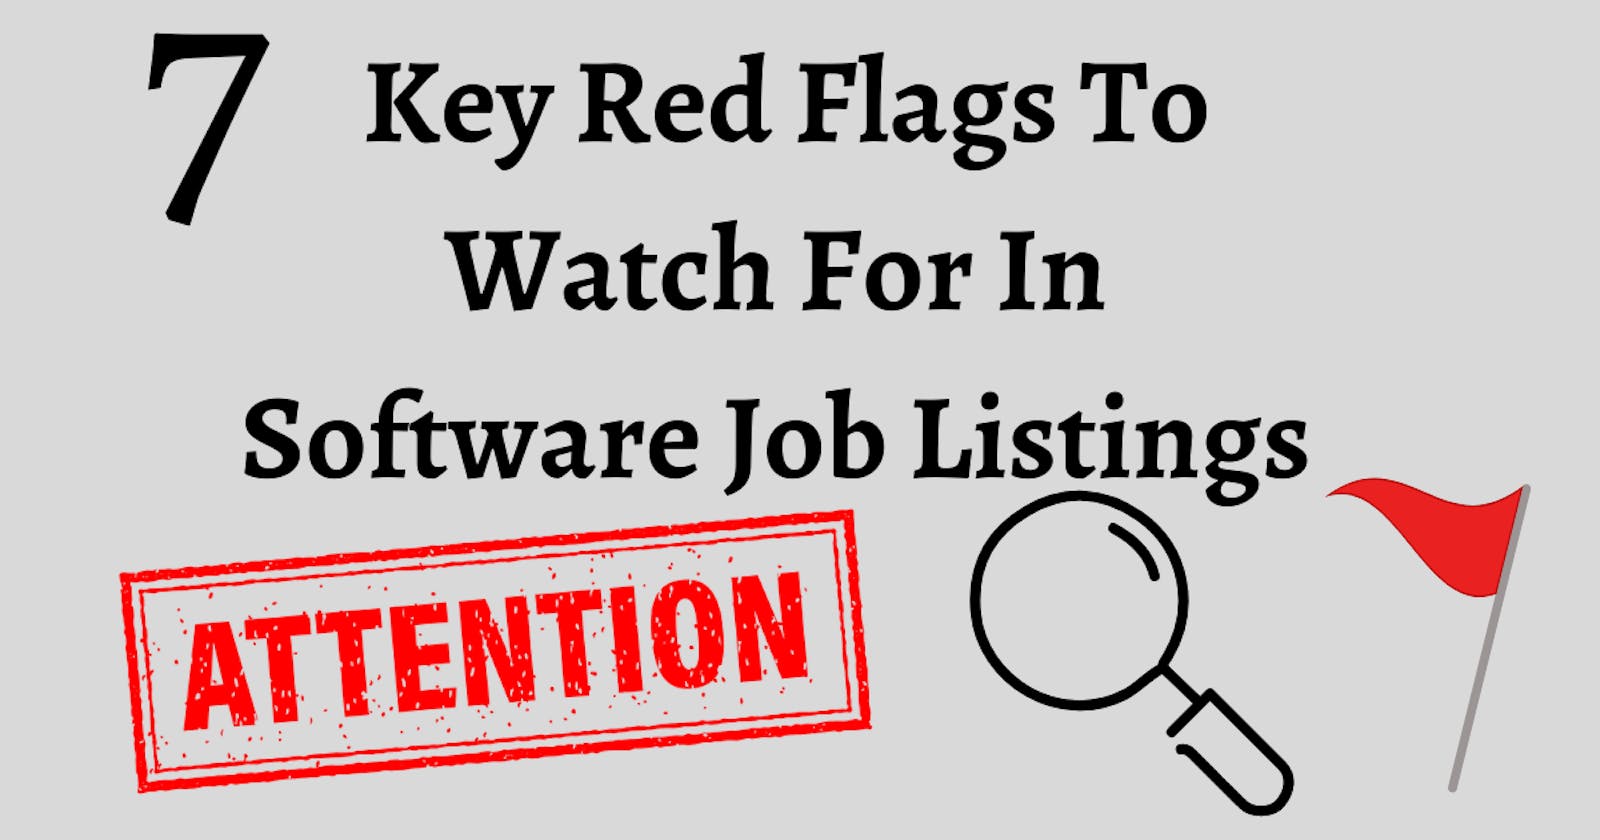 7 Key Red Flags To Watch For In Software Job Listings